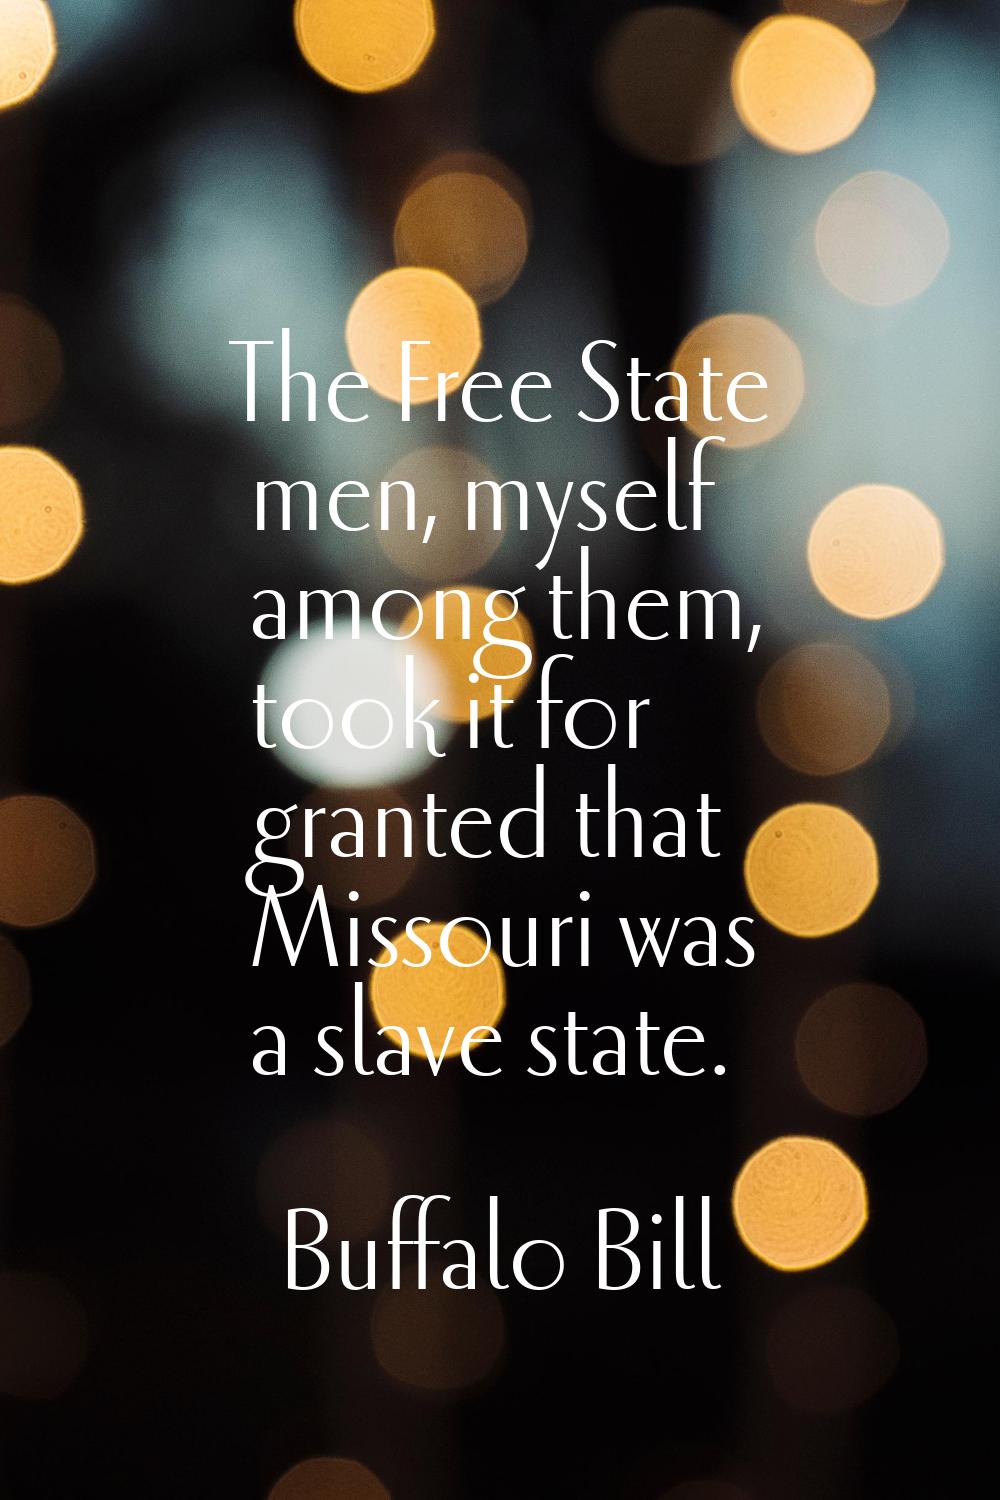 The Free State men, myself among them, took it for granted that Missouri was a slave state.